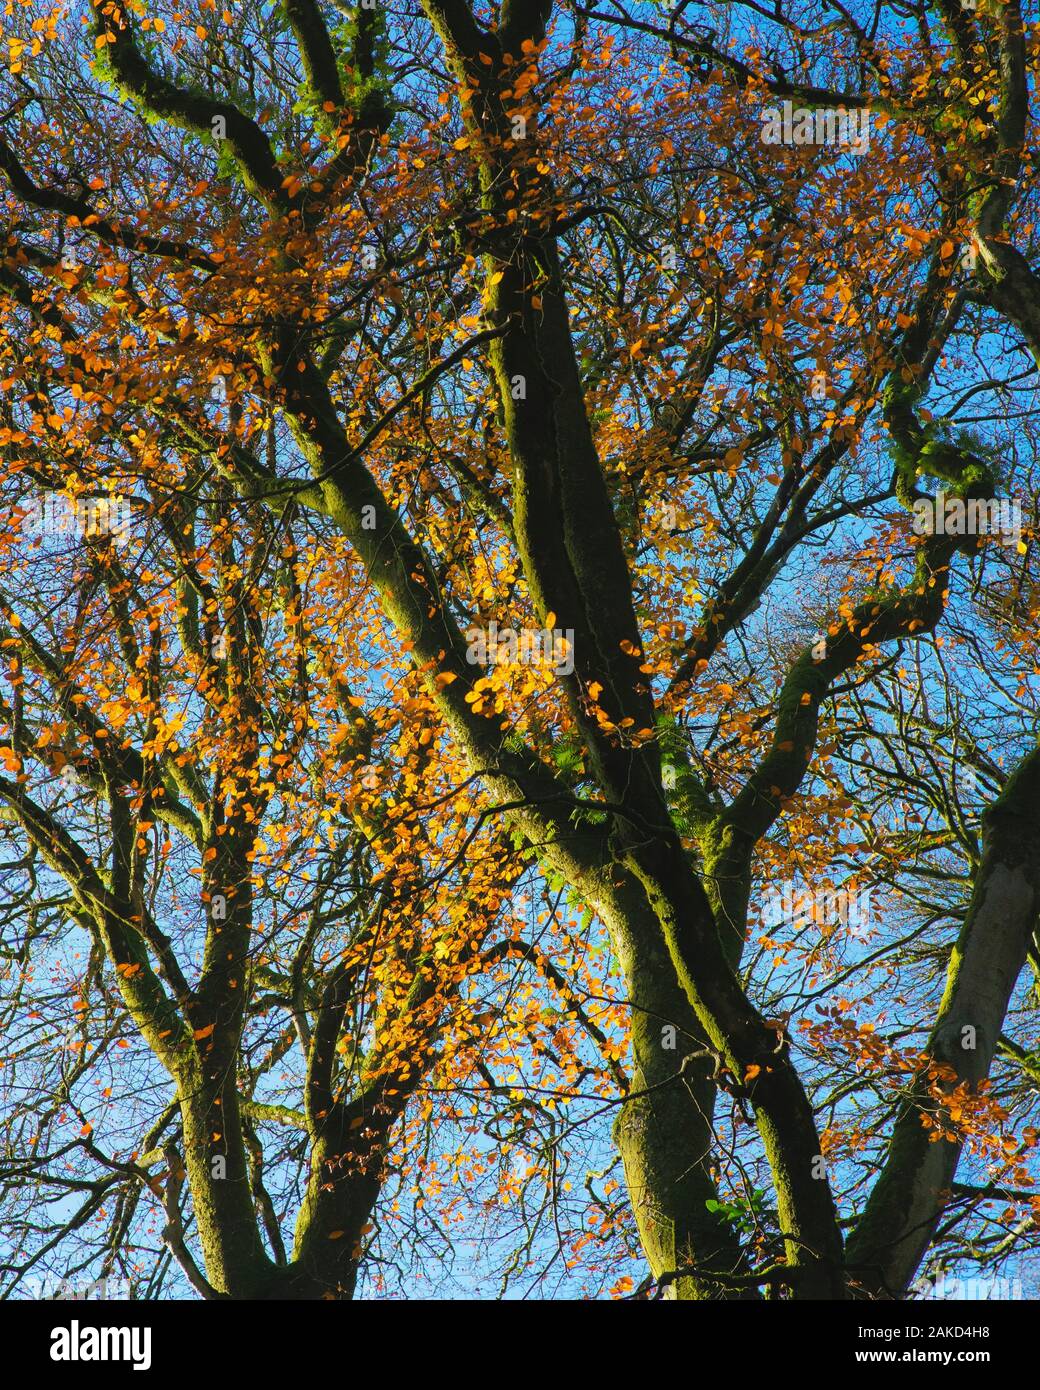 Autumnal trees, golden leaves ablaze and back lit by the sun like fire. Late autumn near Henllan Bridge, Newcastle Emlyn . West Wales UK 2020 Stock Photo